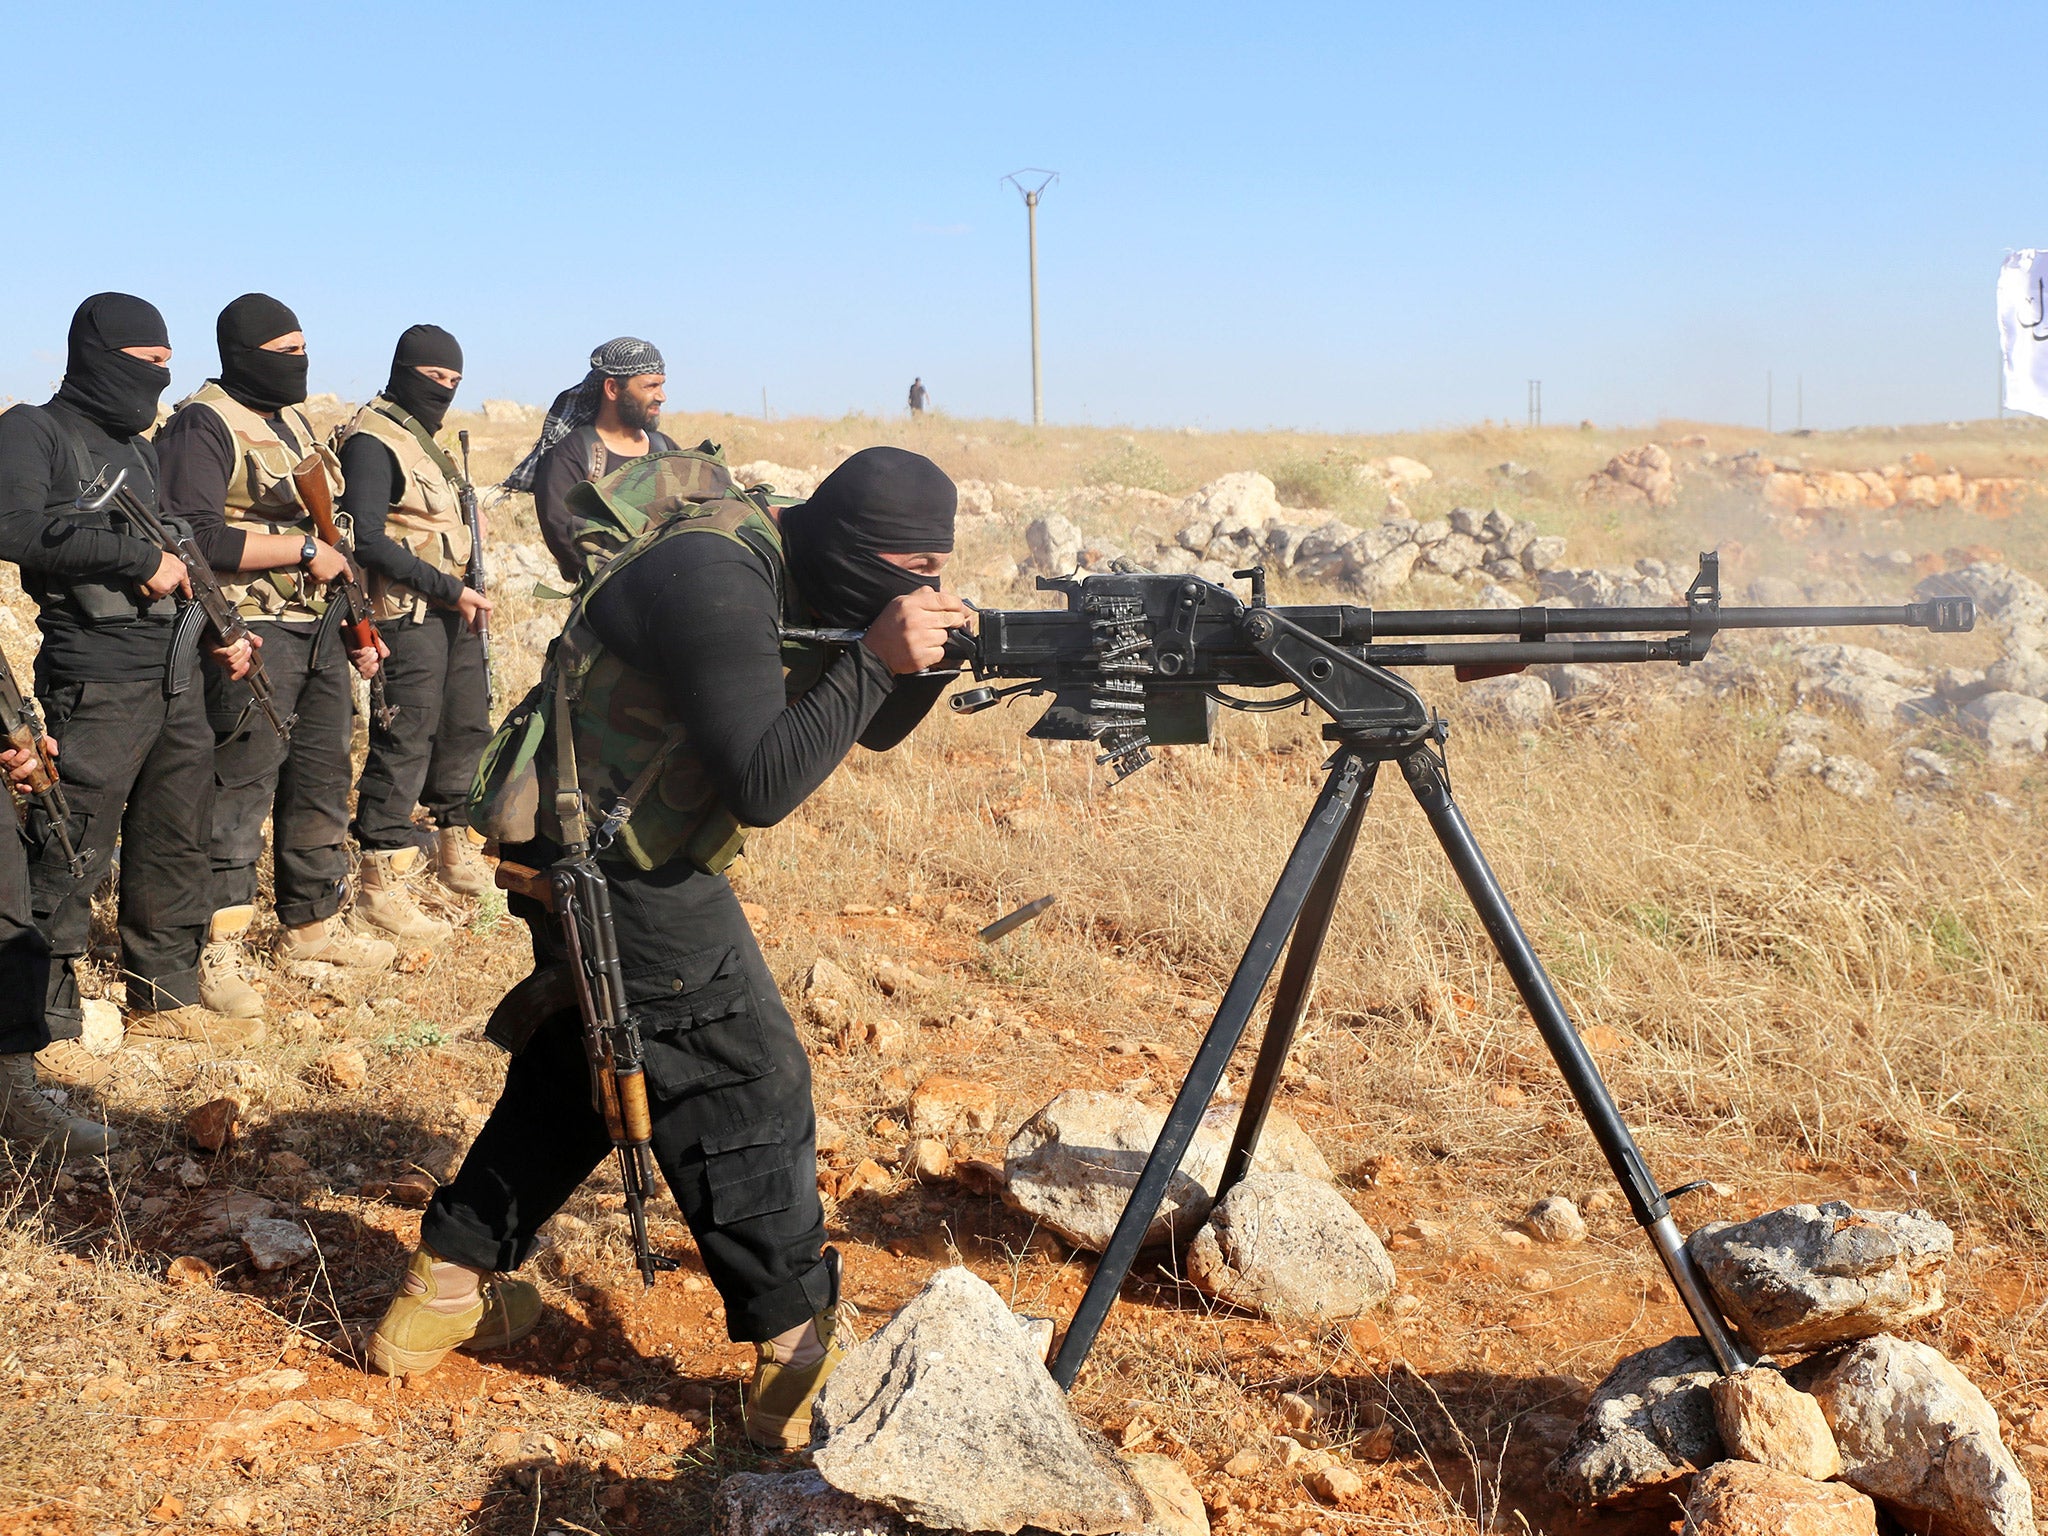 Rebel fighters from the Free Syrian Army taking part in military training near Aleppo, earlier this year